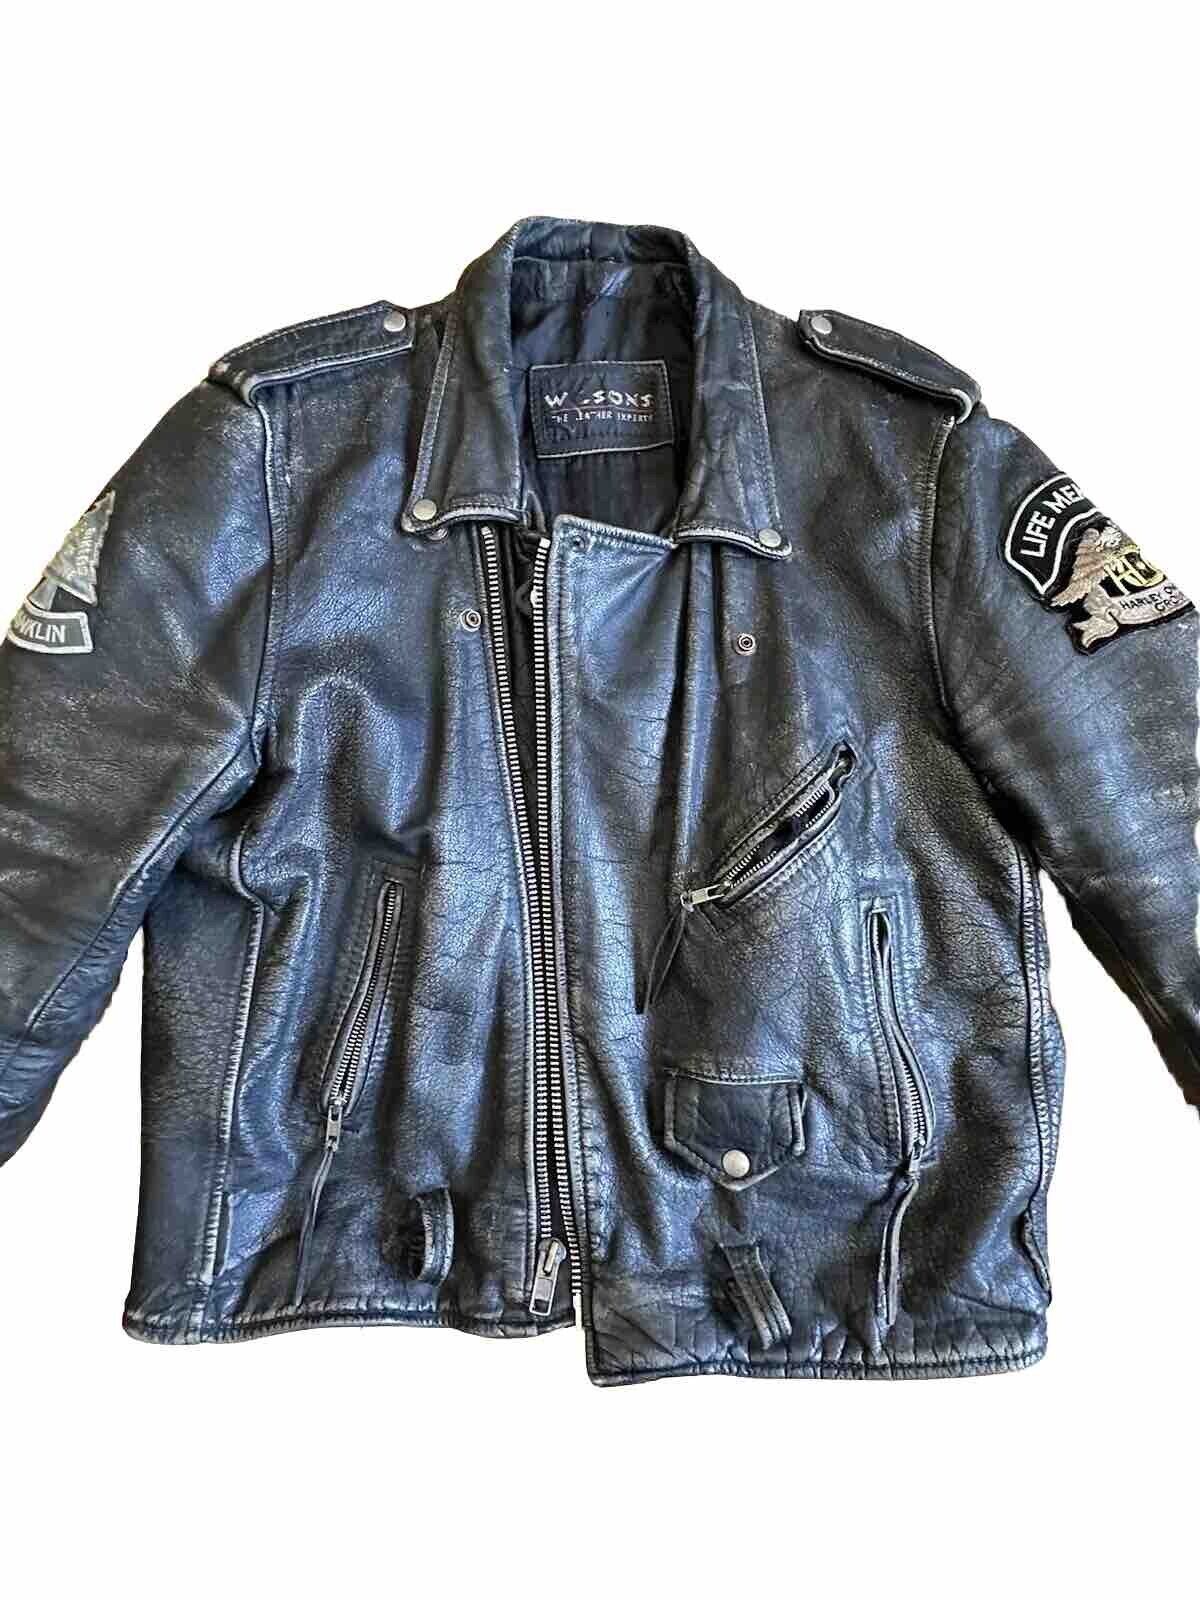 Vintage Small USA Made 80s Leather Biker Jacket Harley Patch Motorcycle